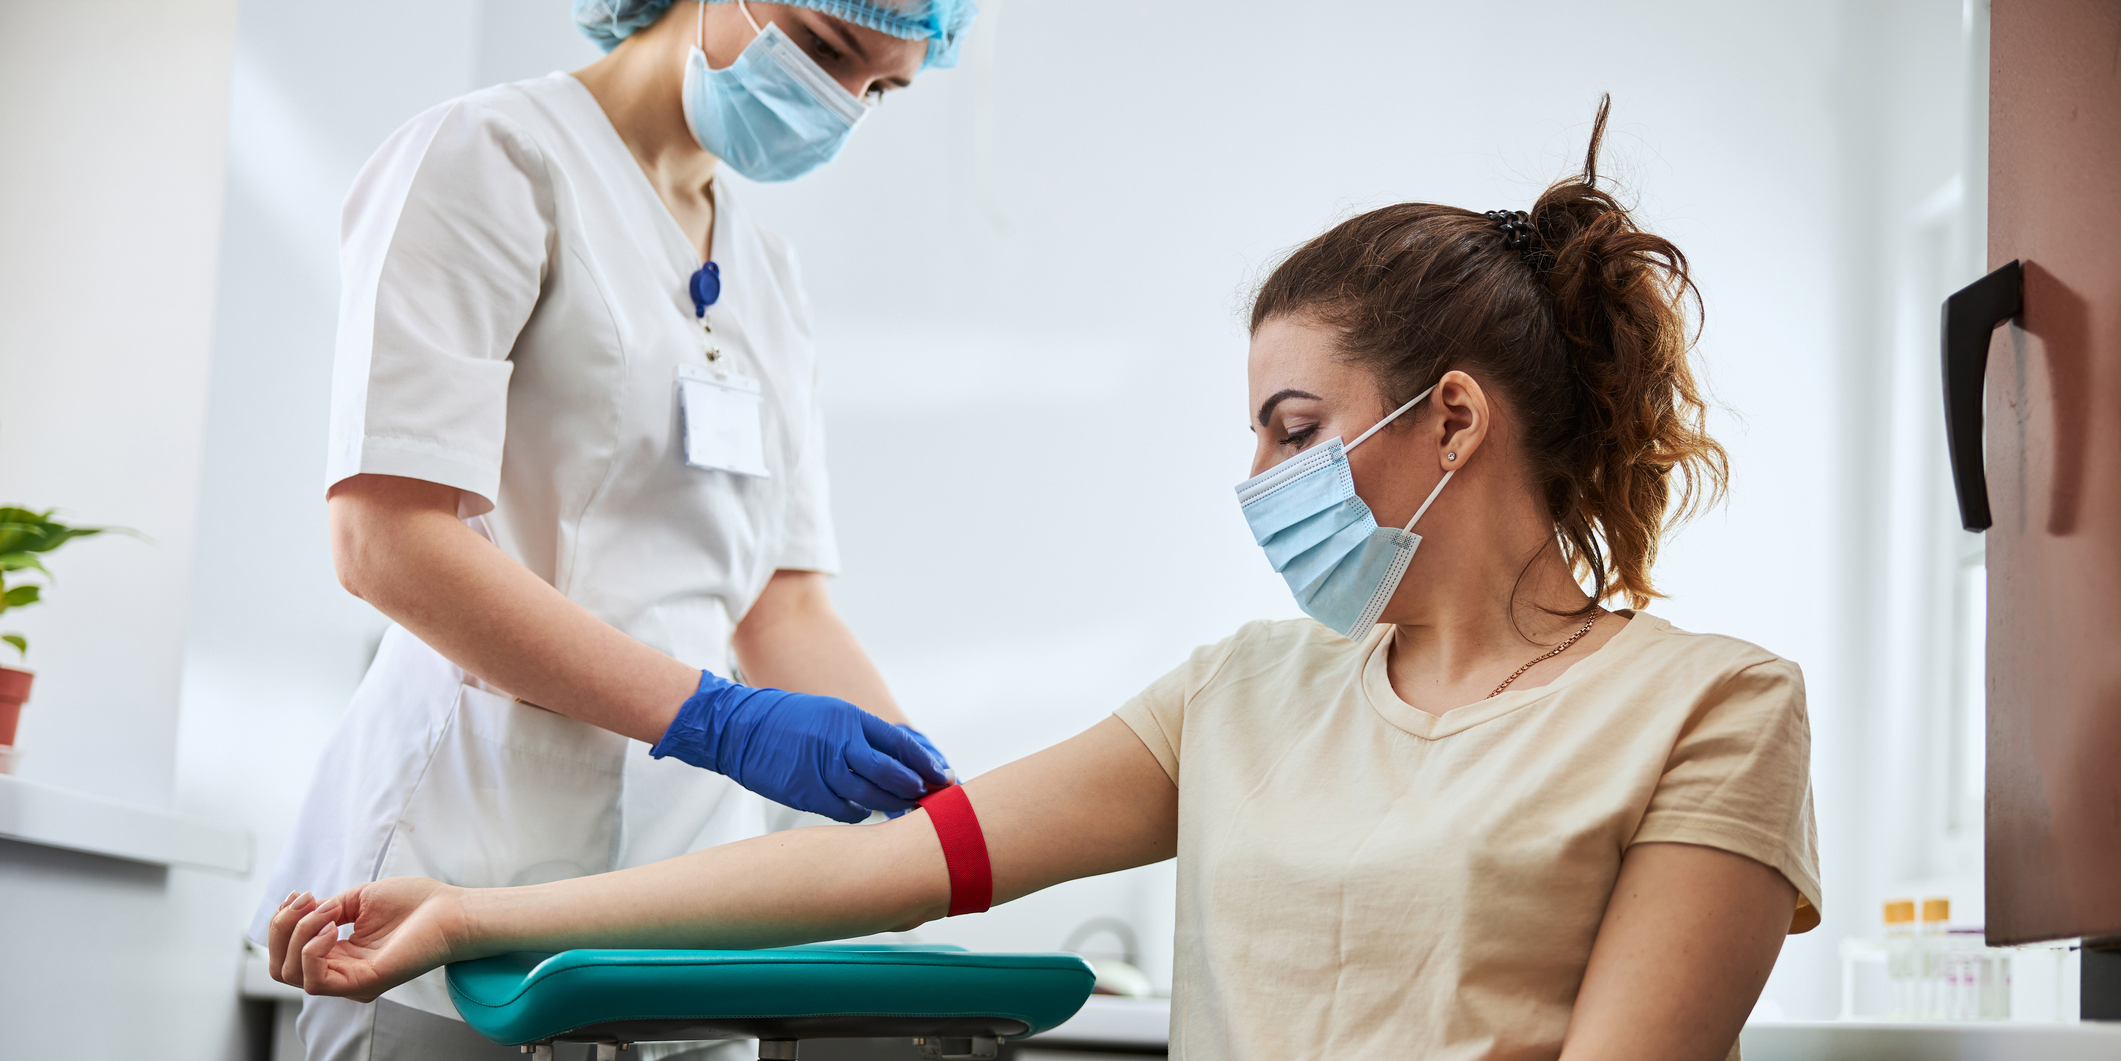 Skilled focused young phlebotomy technician applying a tourniquet to a female patient arm for venipuncture